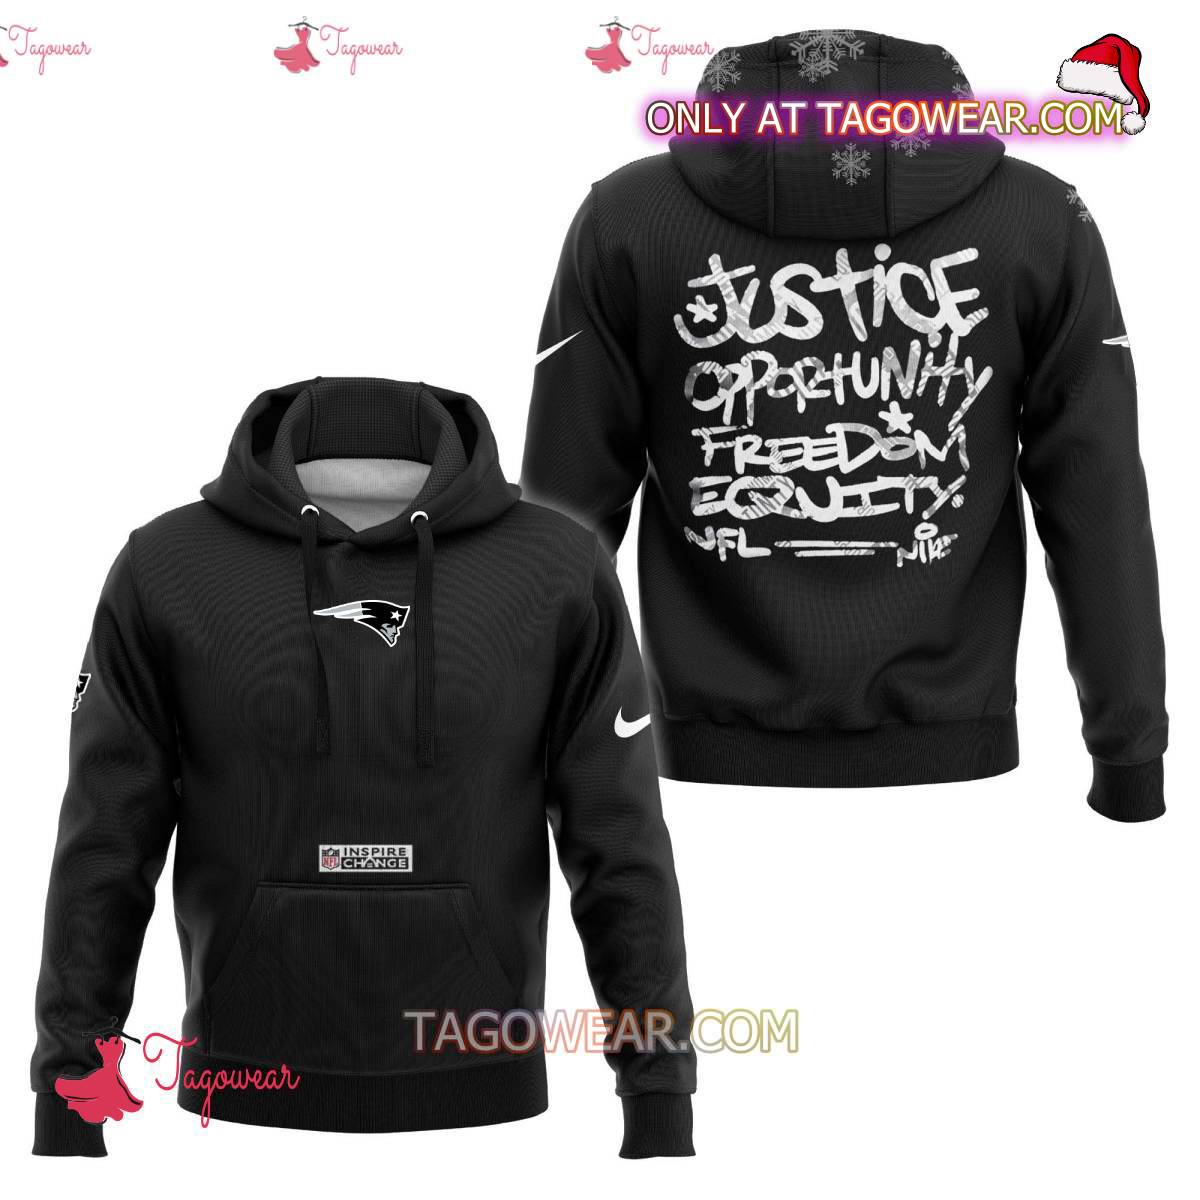 New England Patriots NFL Inspire Change Justice Opportunity Equality Freedom Hoodie